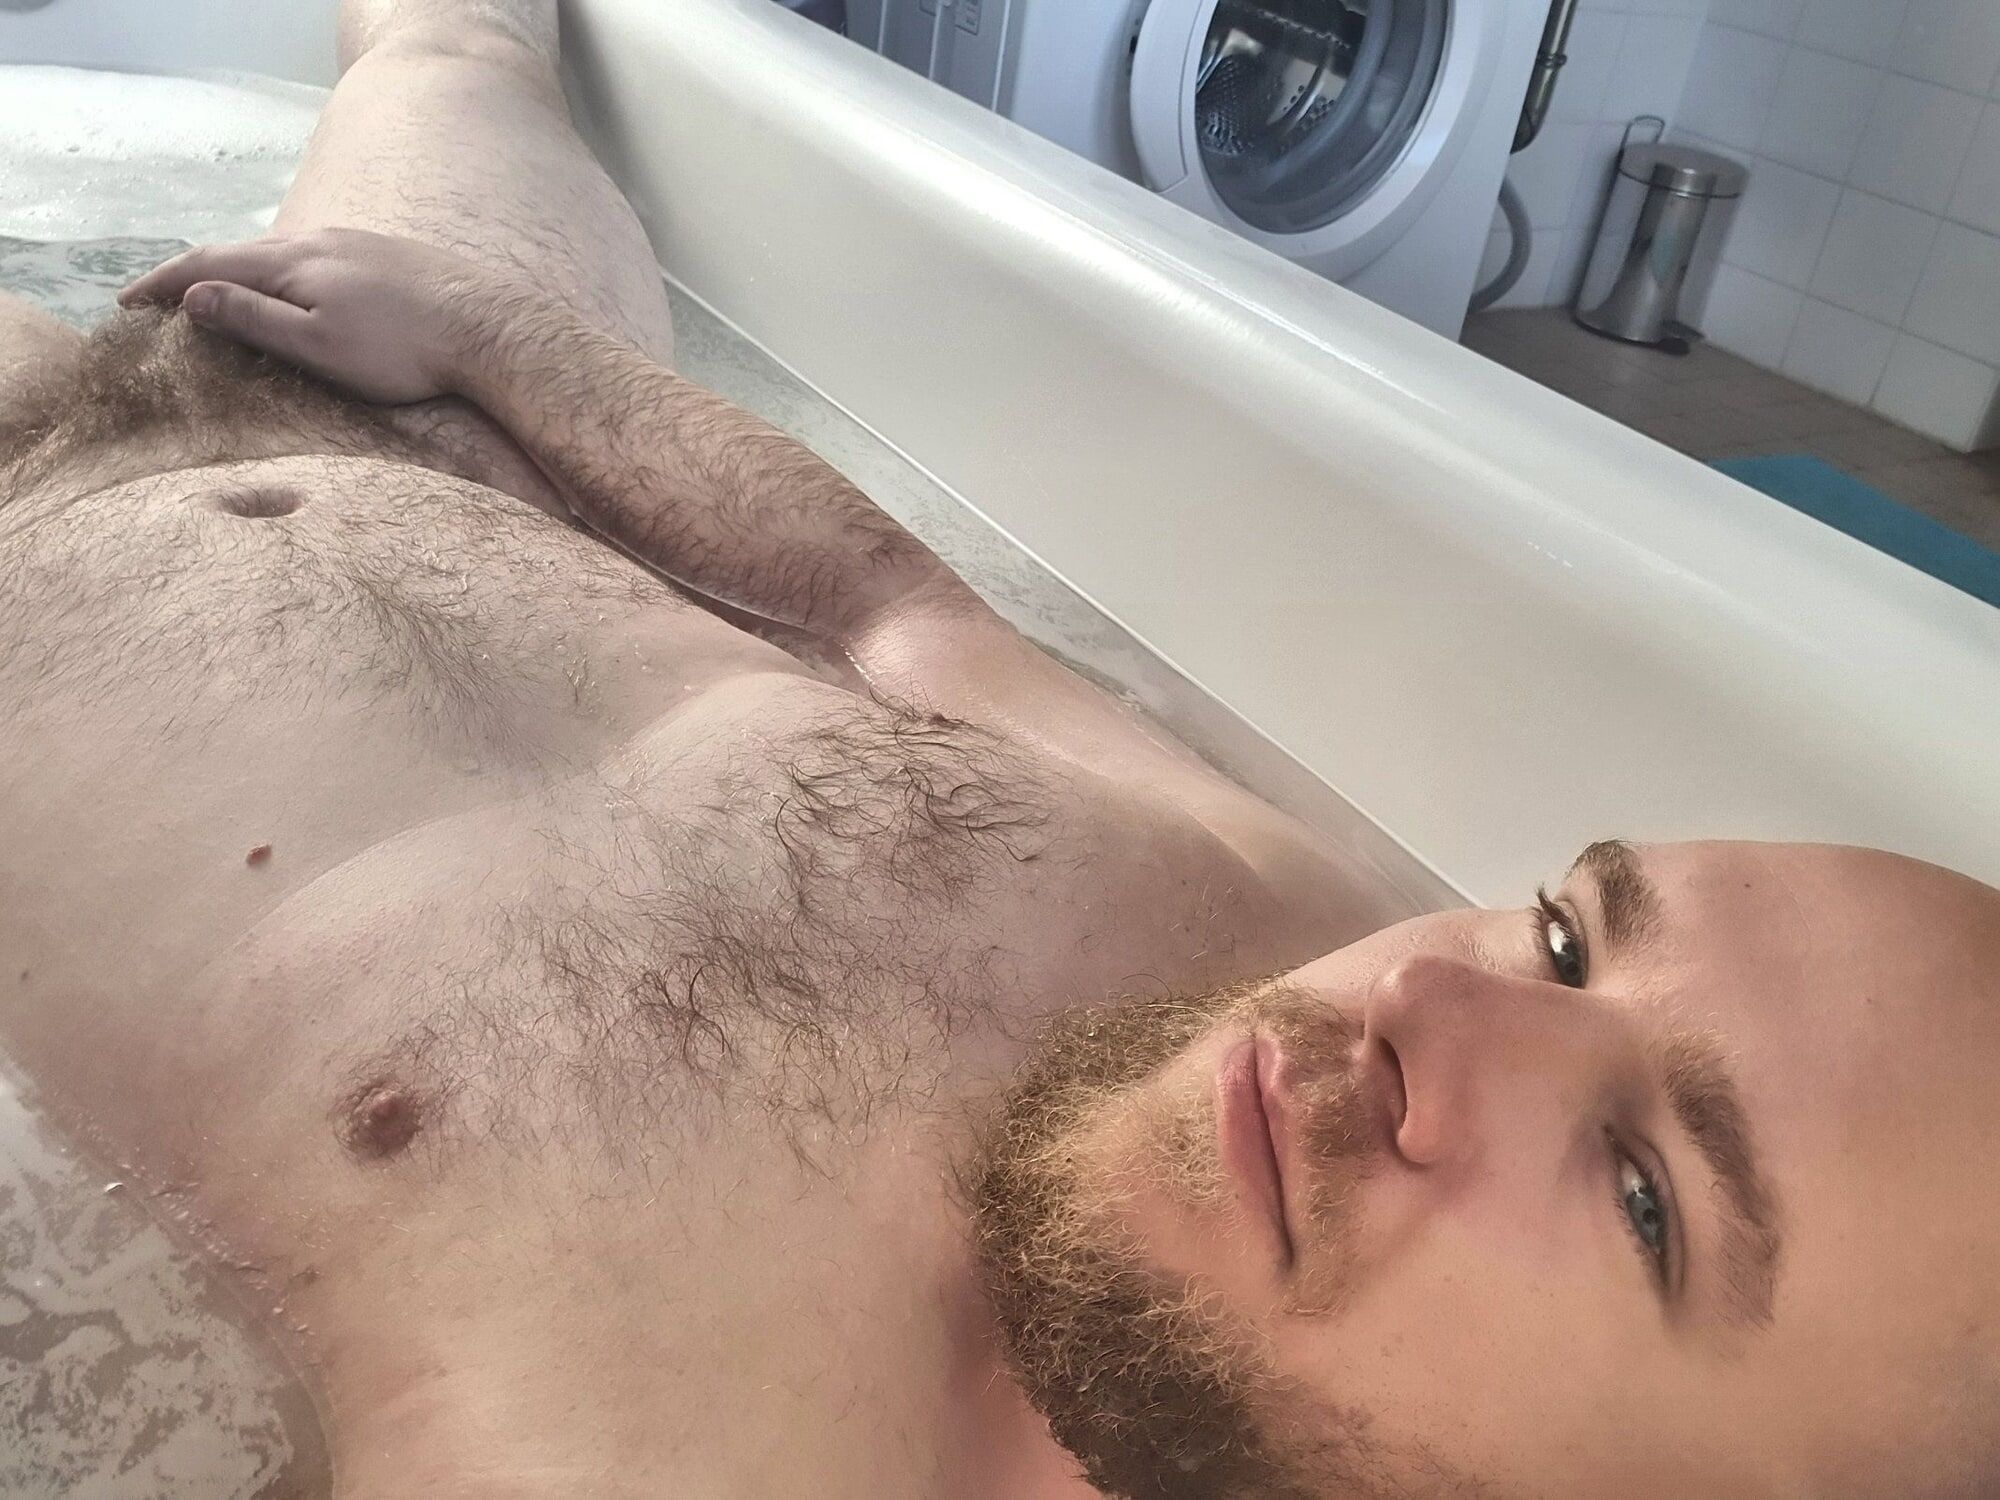 A really hairy gay dirty cock - Part 4 #2